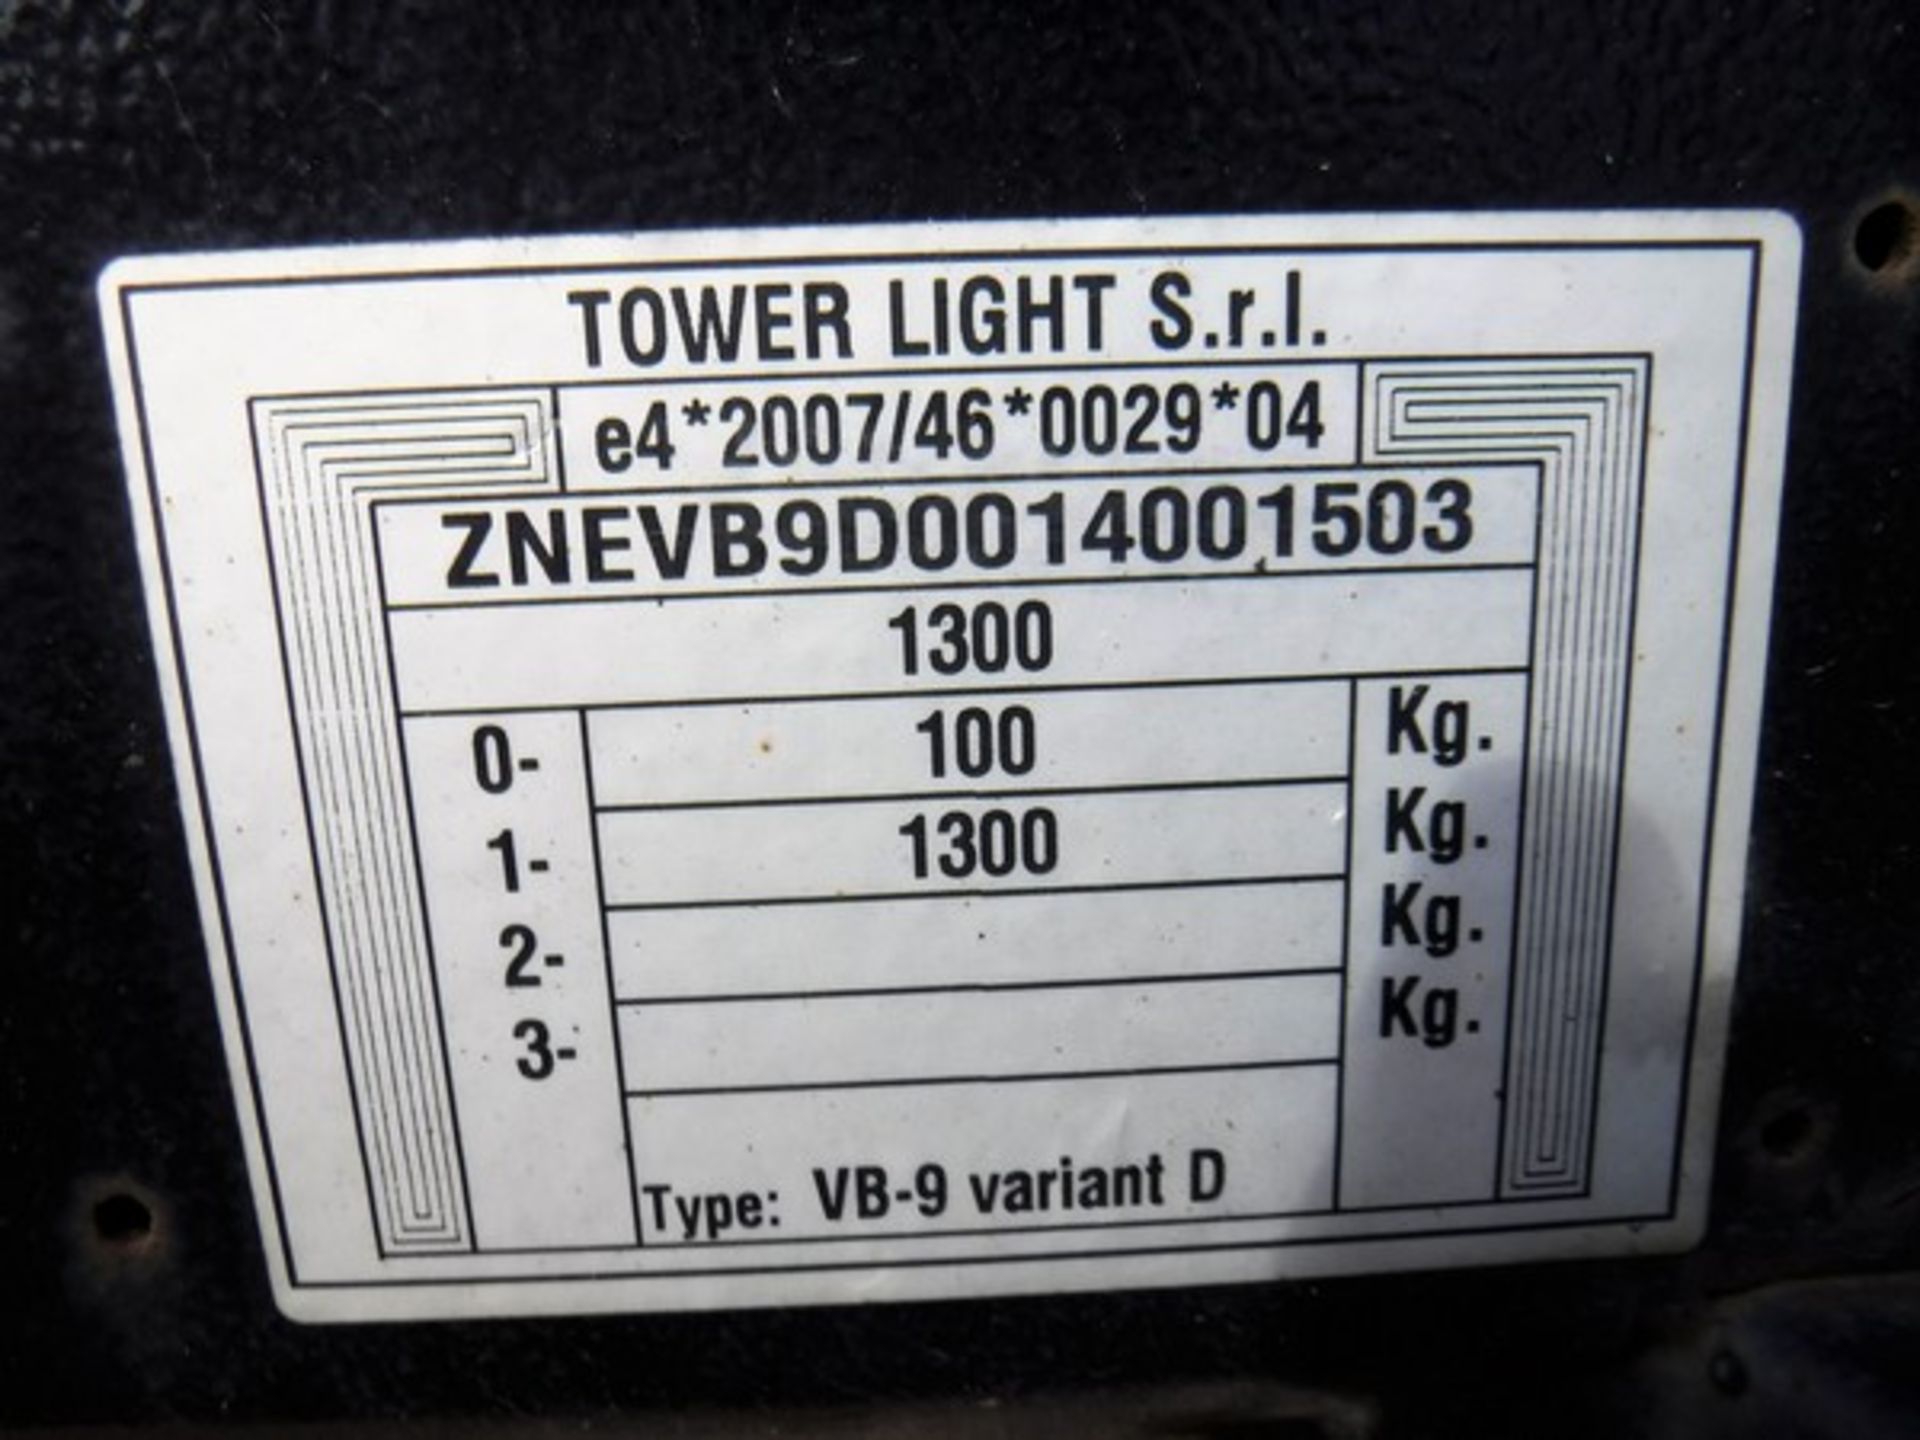 TOWER LIGHT VB9 mobile tower light, galvansed sectons hydraulic lifting system 2.5kva - 230 v outle - Image 7 of 7